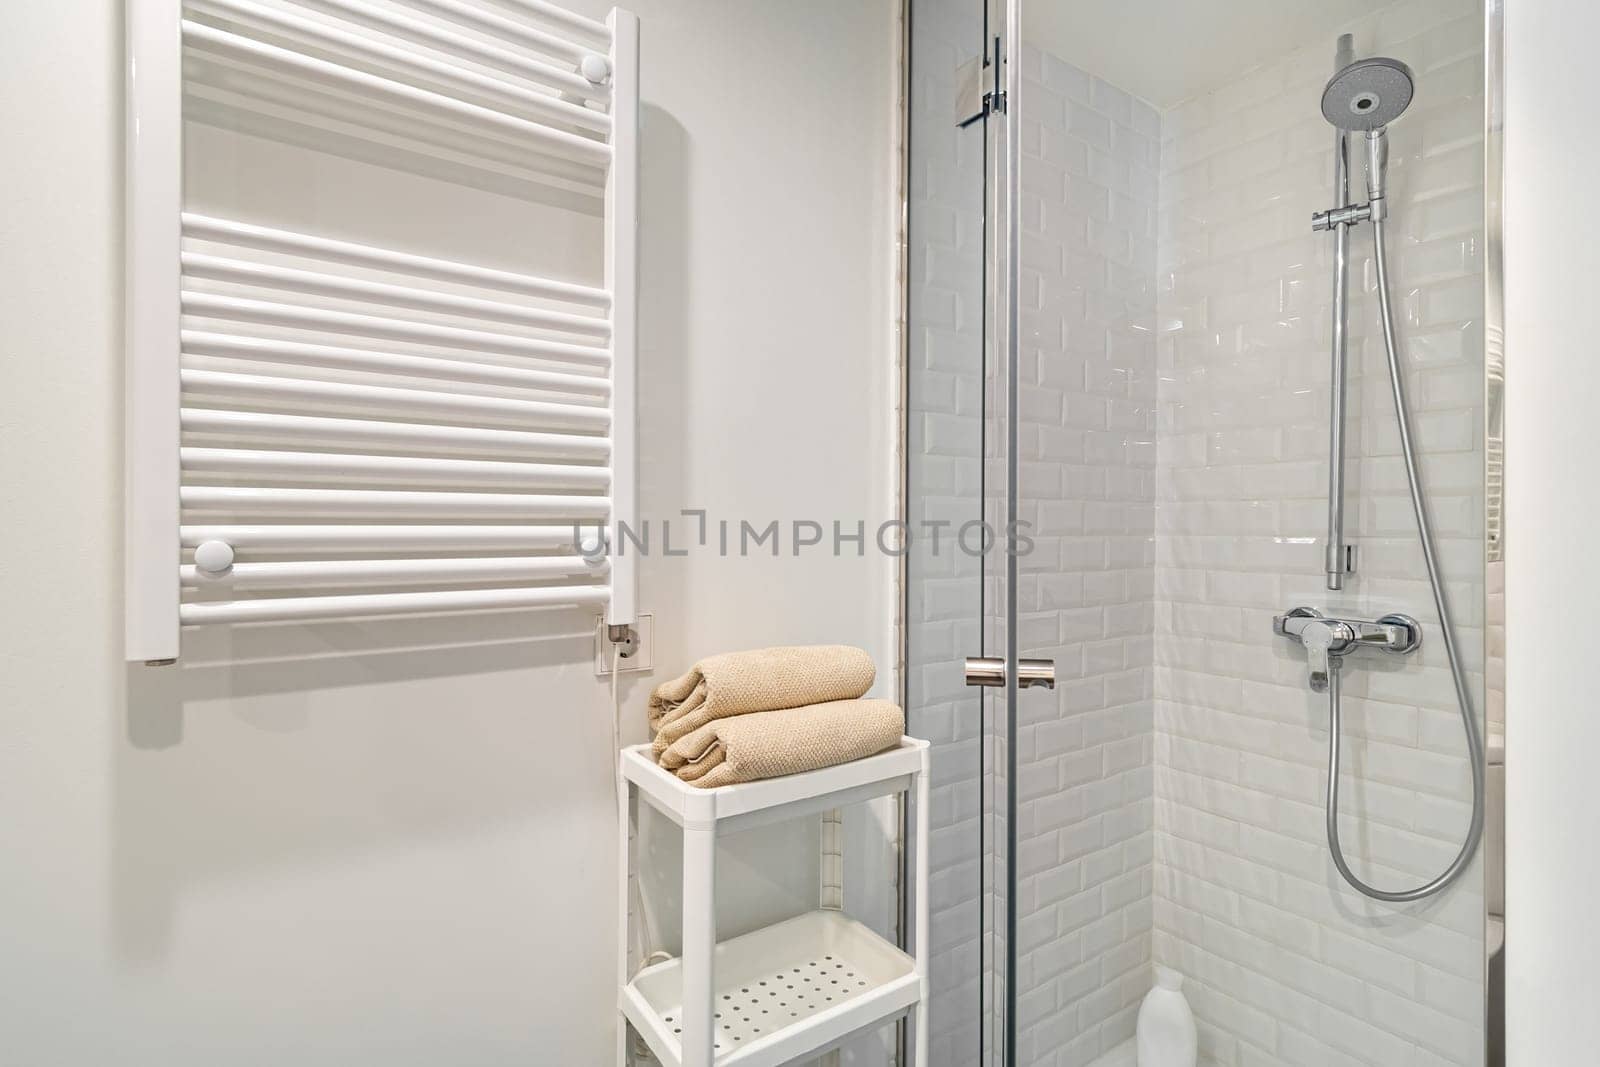 Interior of white bathroom in refurbished apartment. Shower zone with heater, sink and mirror.